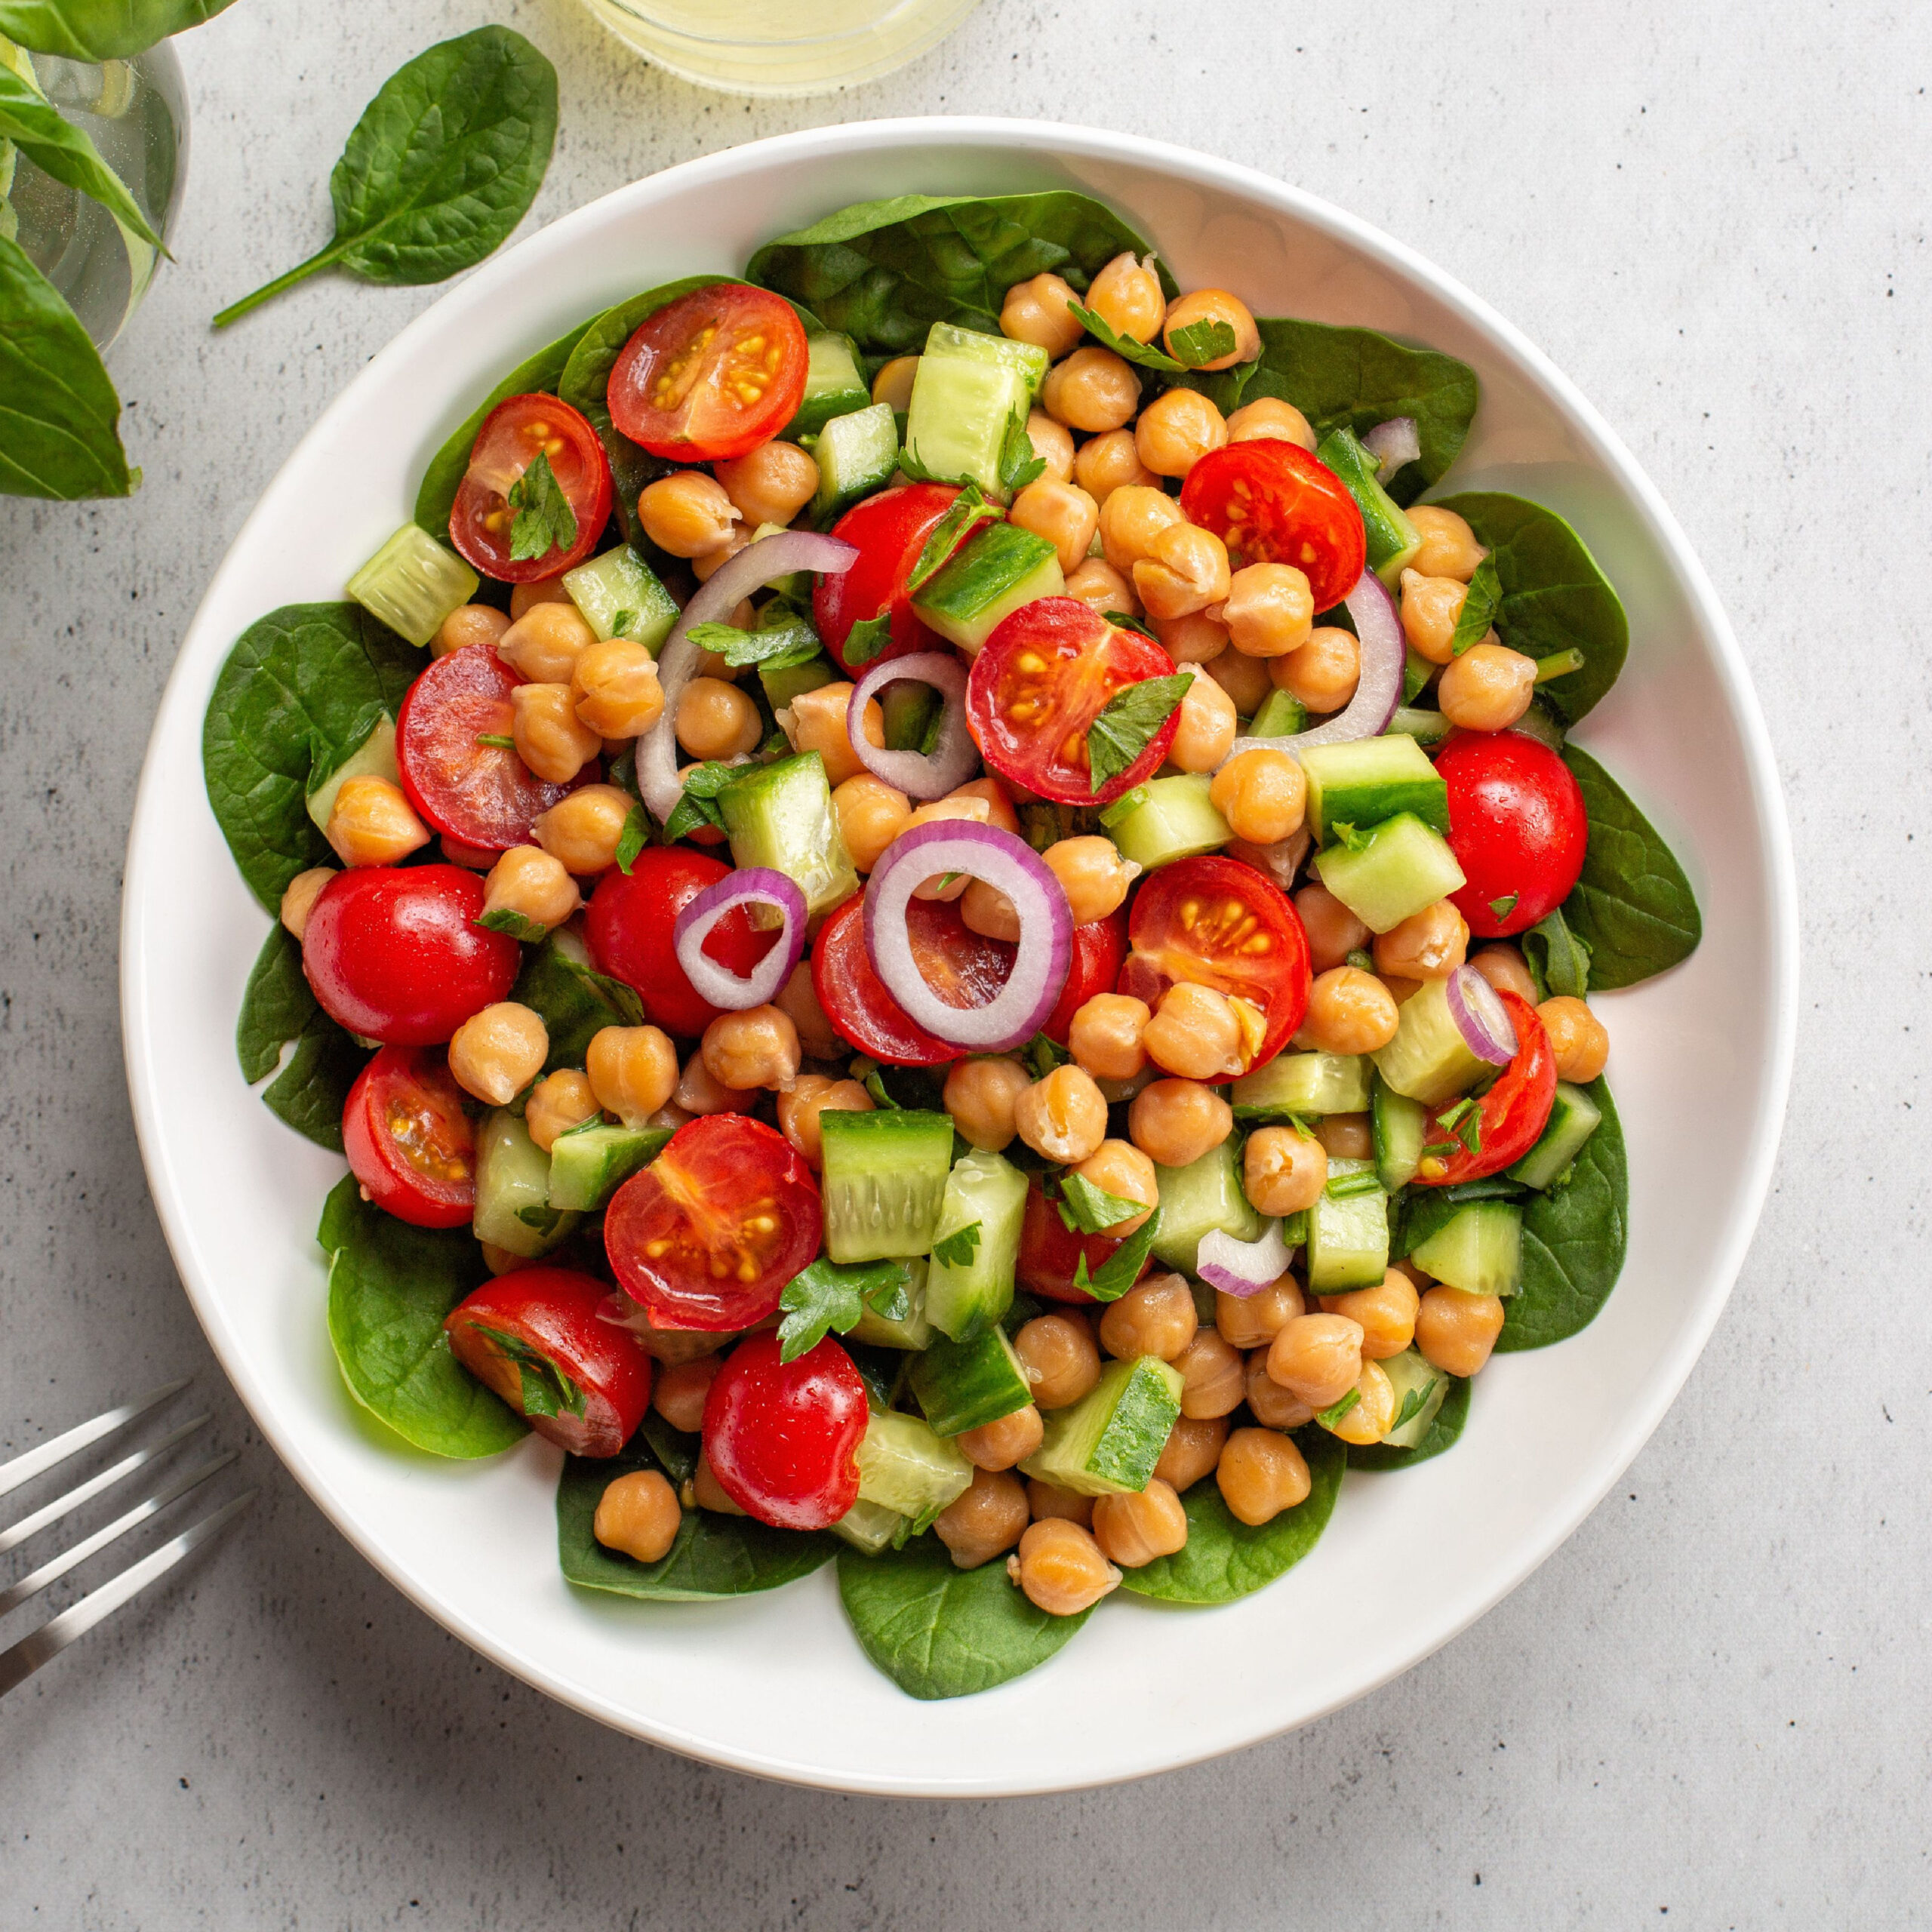 salad topped with chickpeas